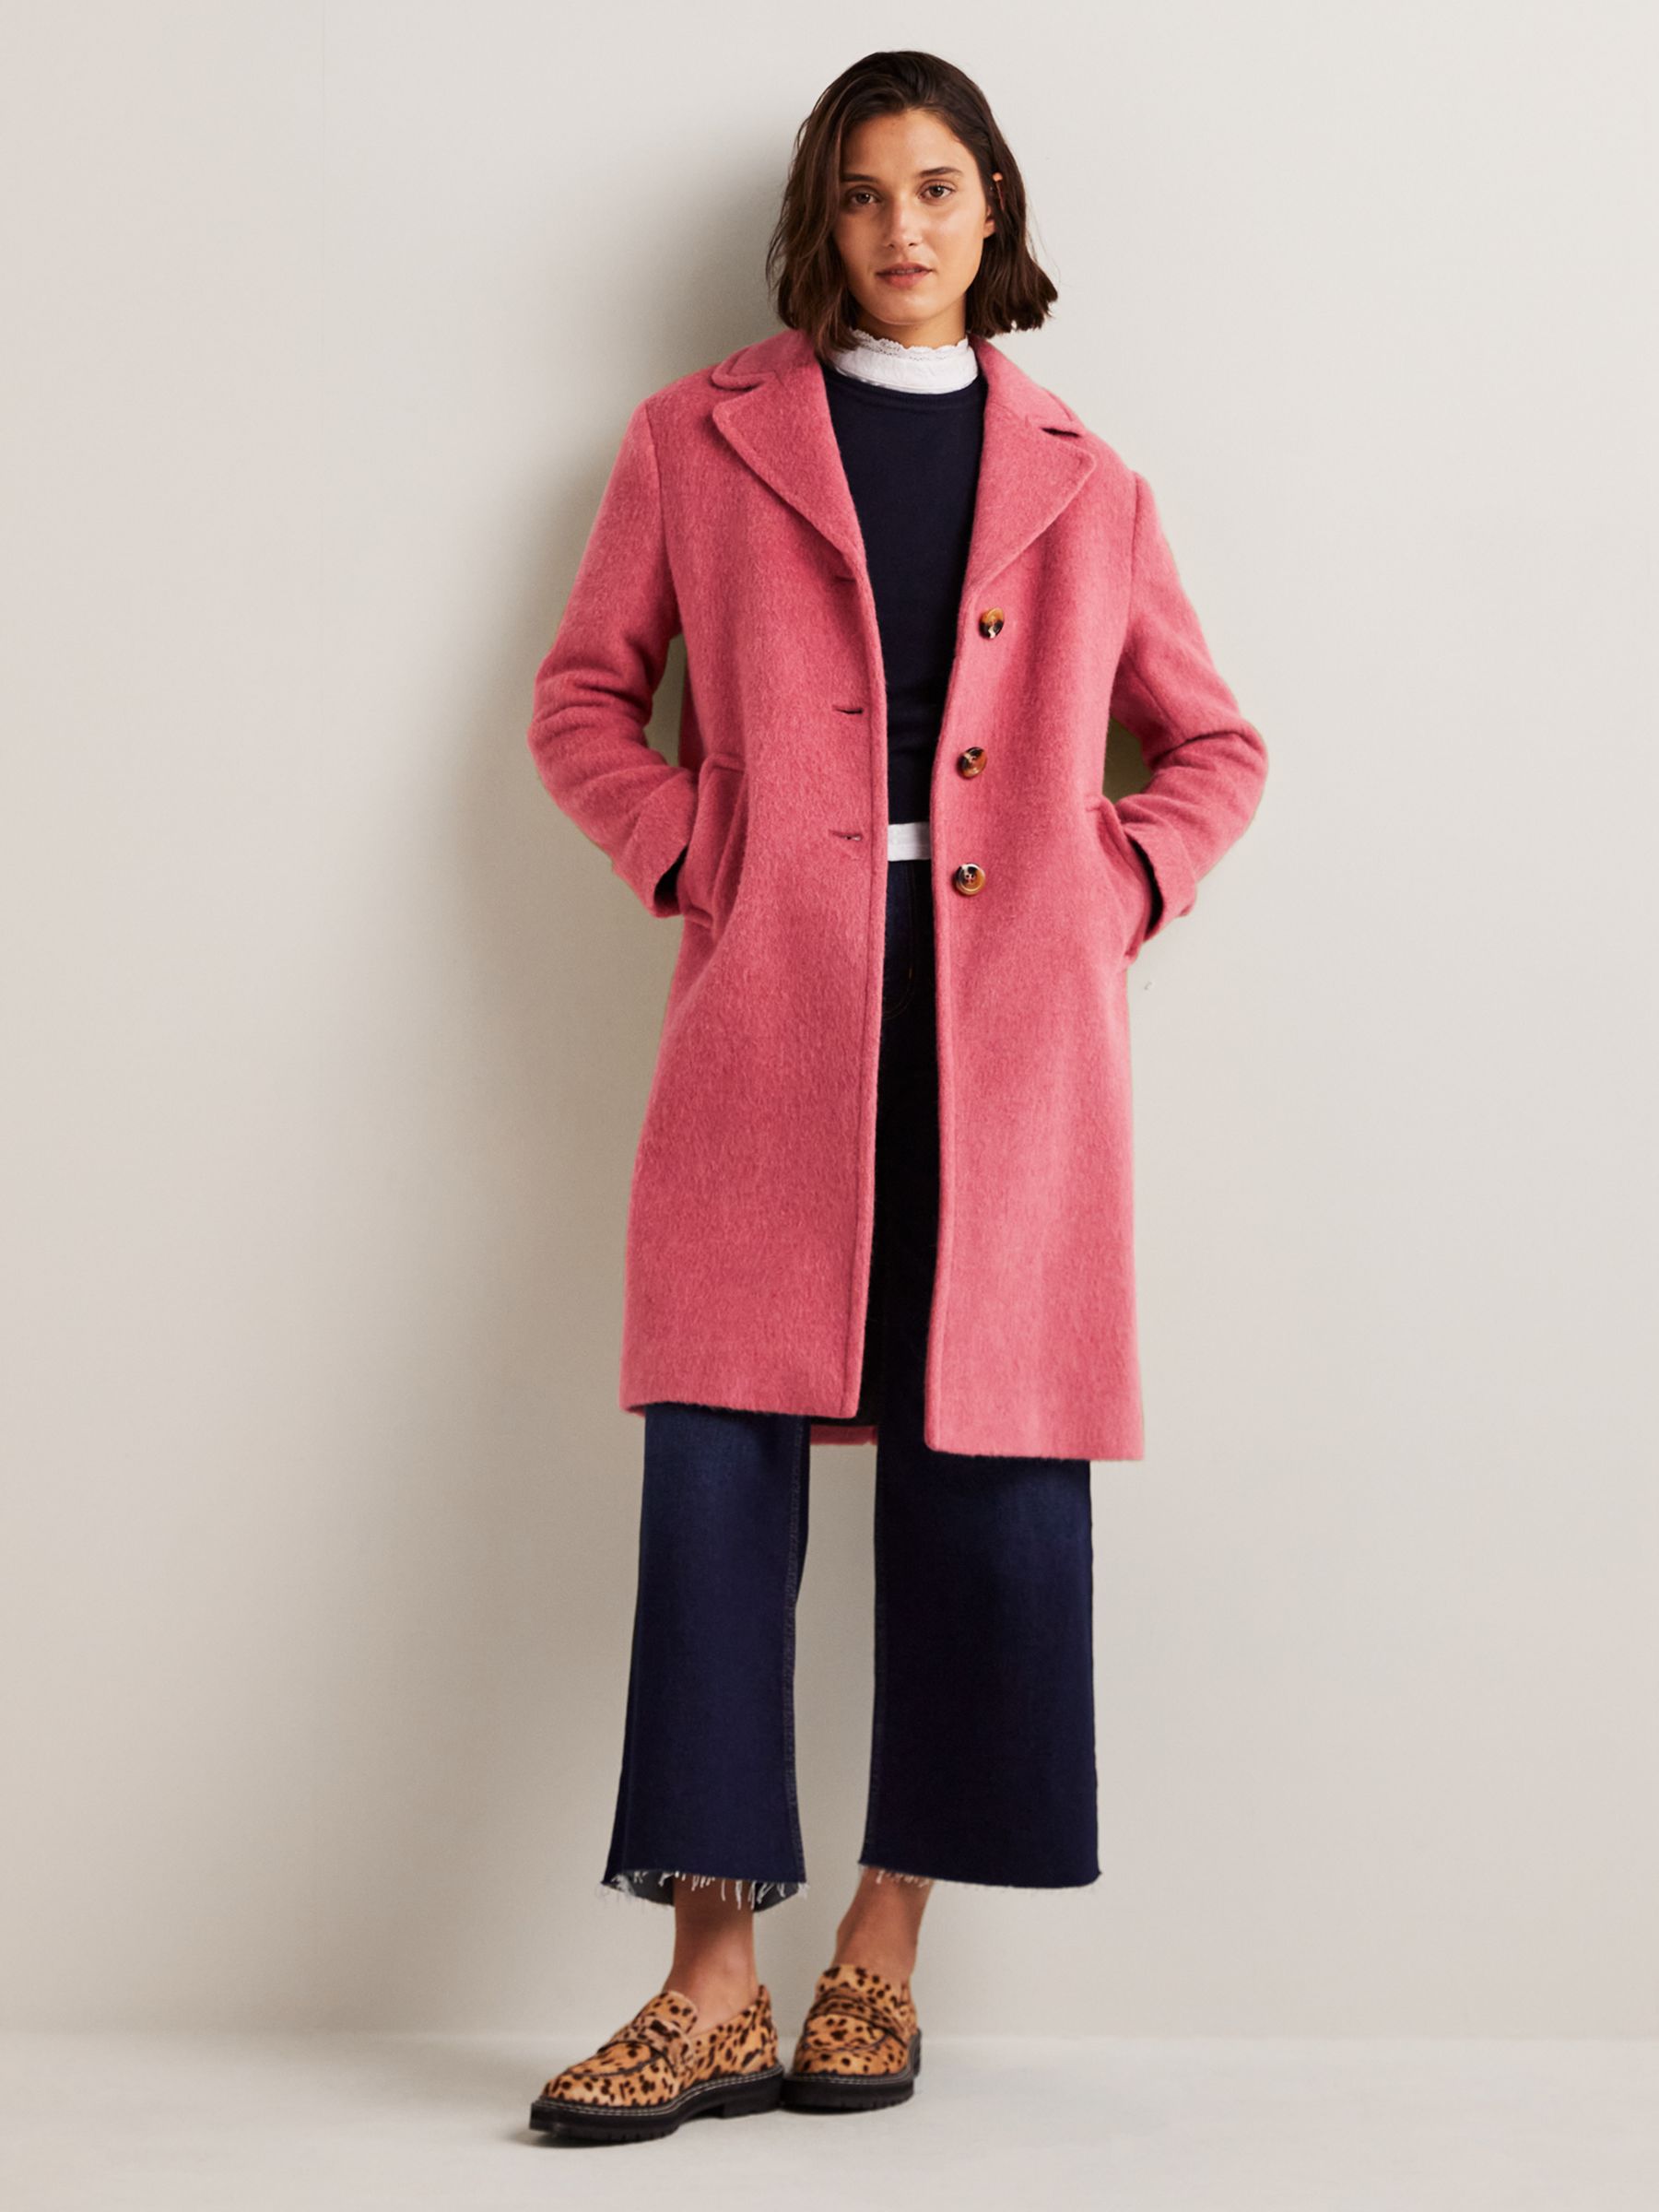 Boden Italian Wool Blend Collared Coat, Dusty Red at John Lewis & Partners